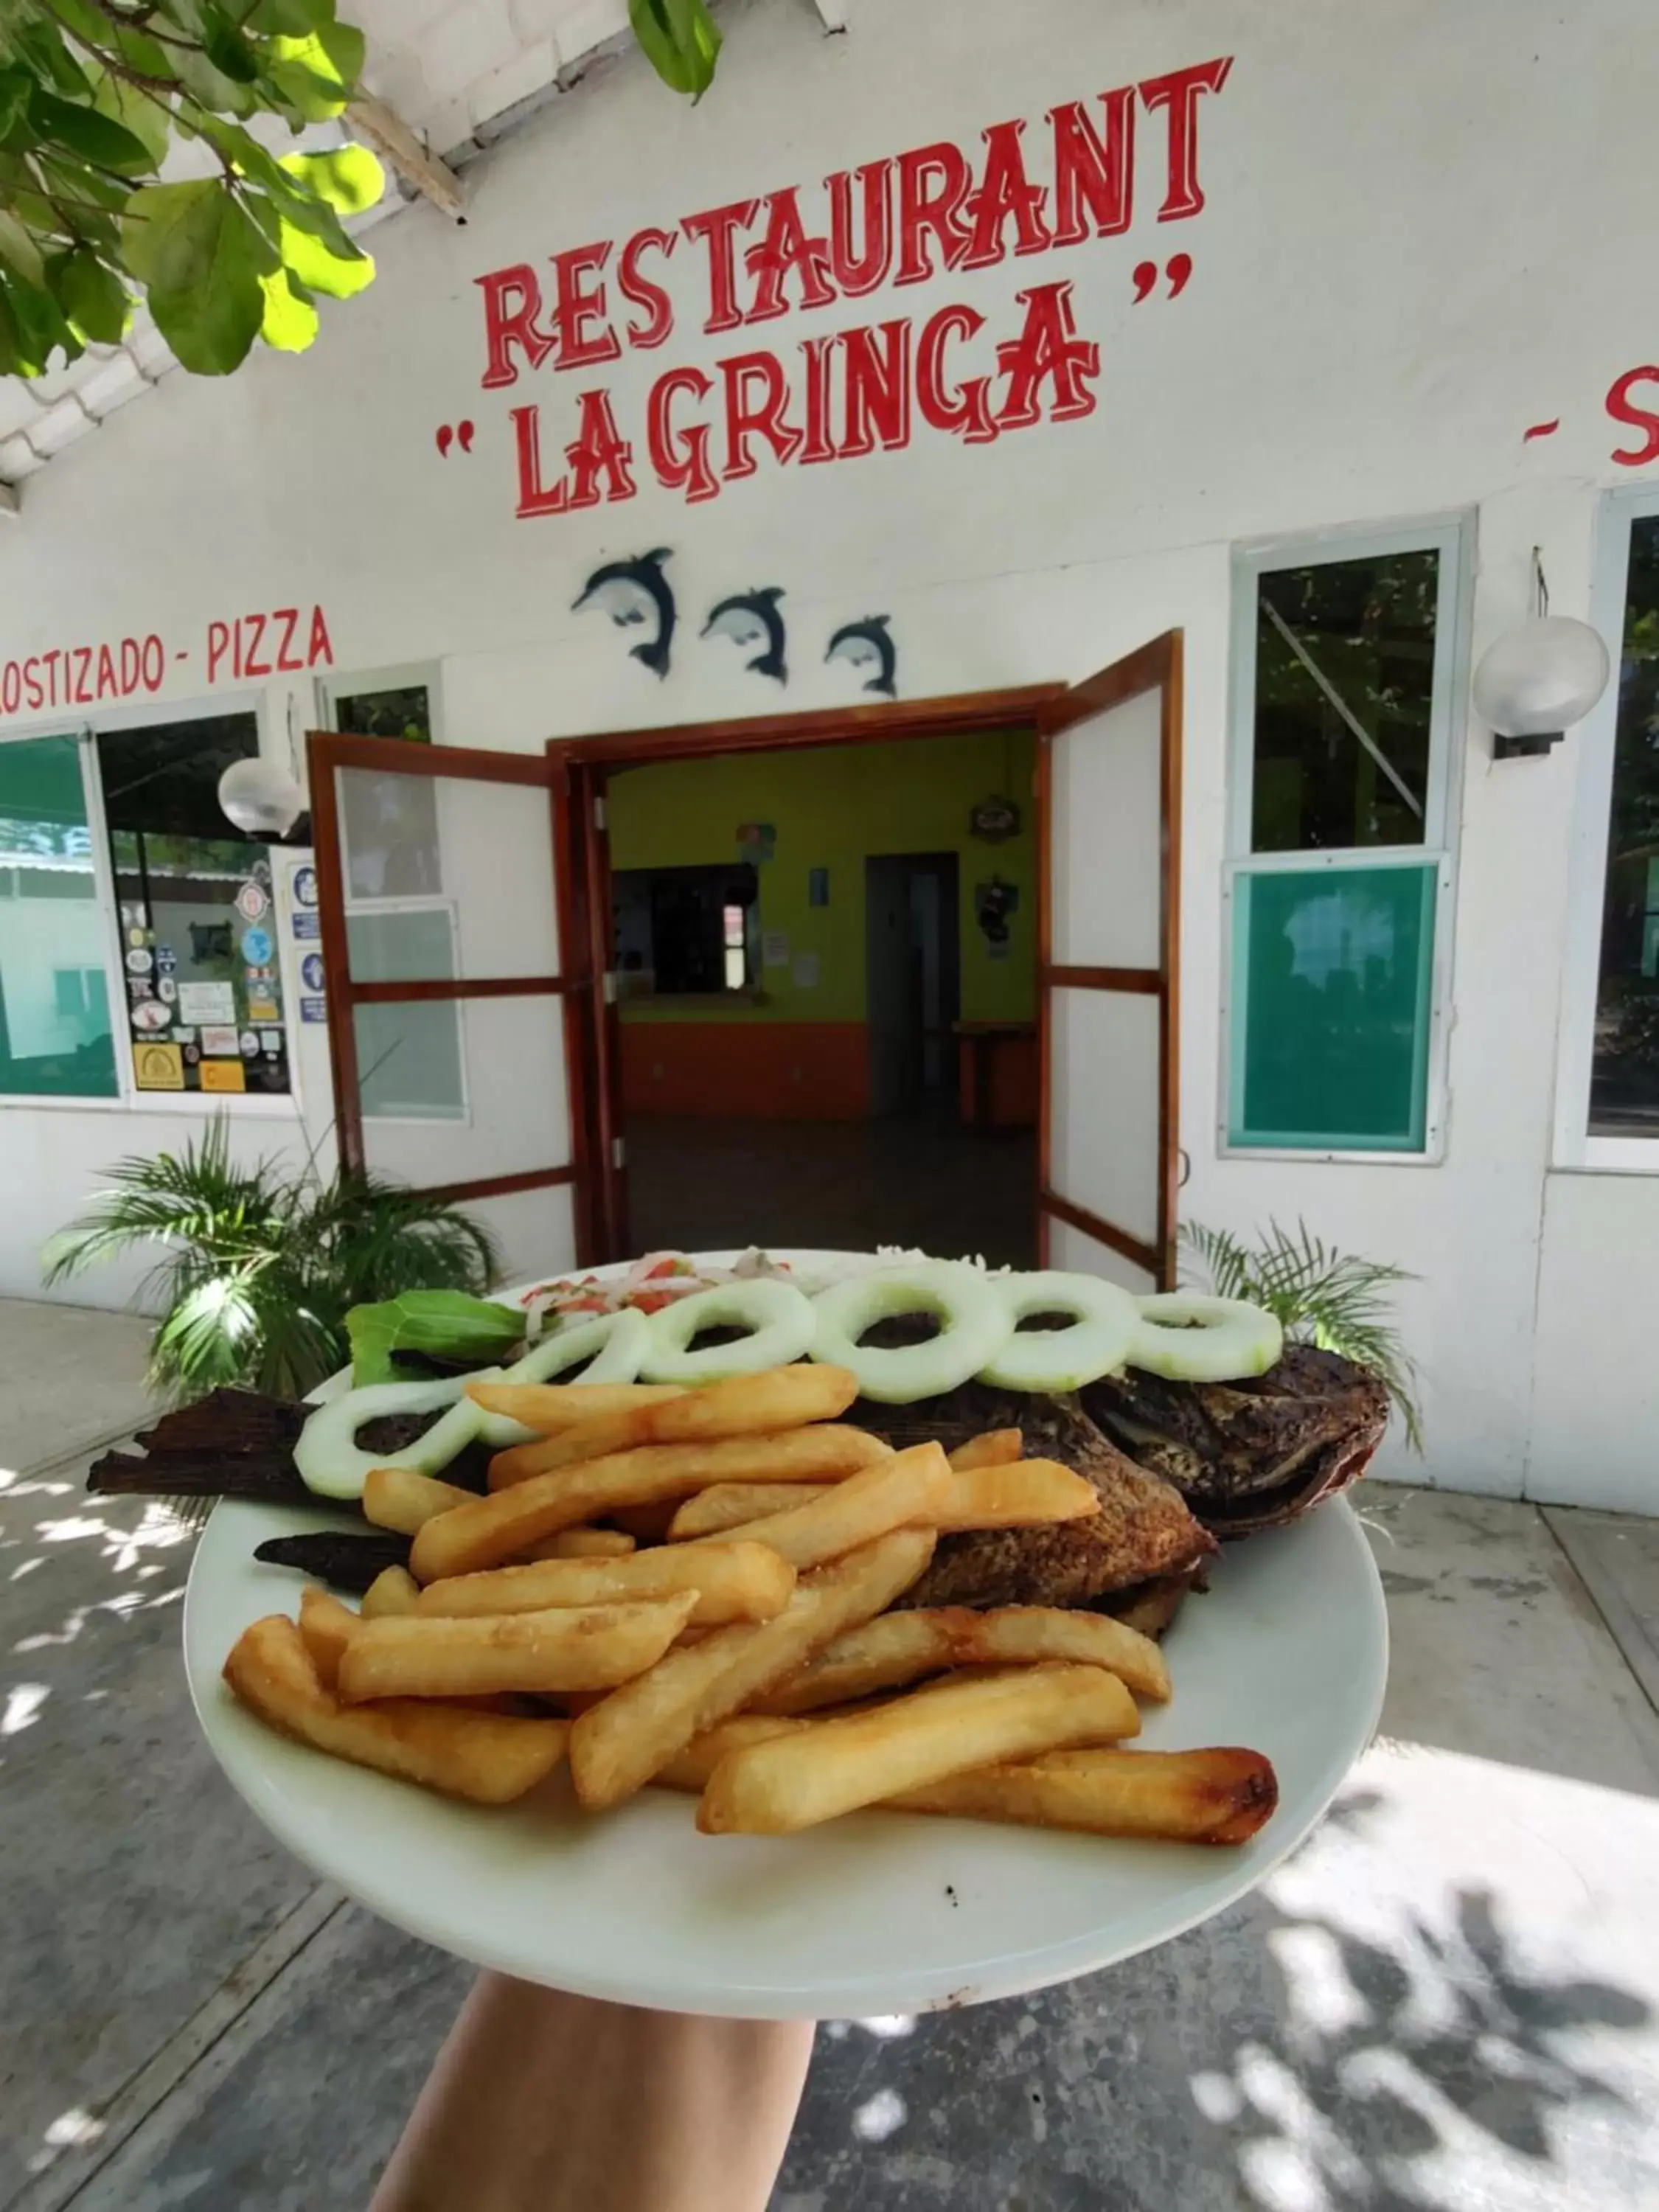 Restaurant/places to eat in Freedom Shores "La Gringa" Hotel - Universally Designed